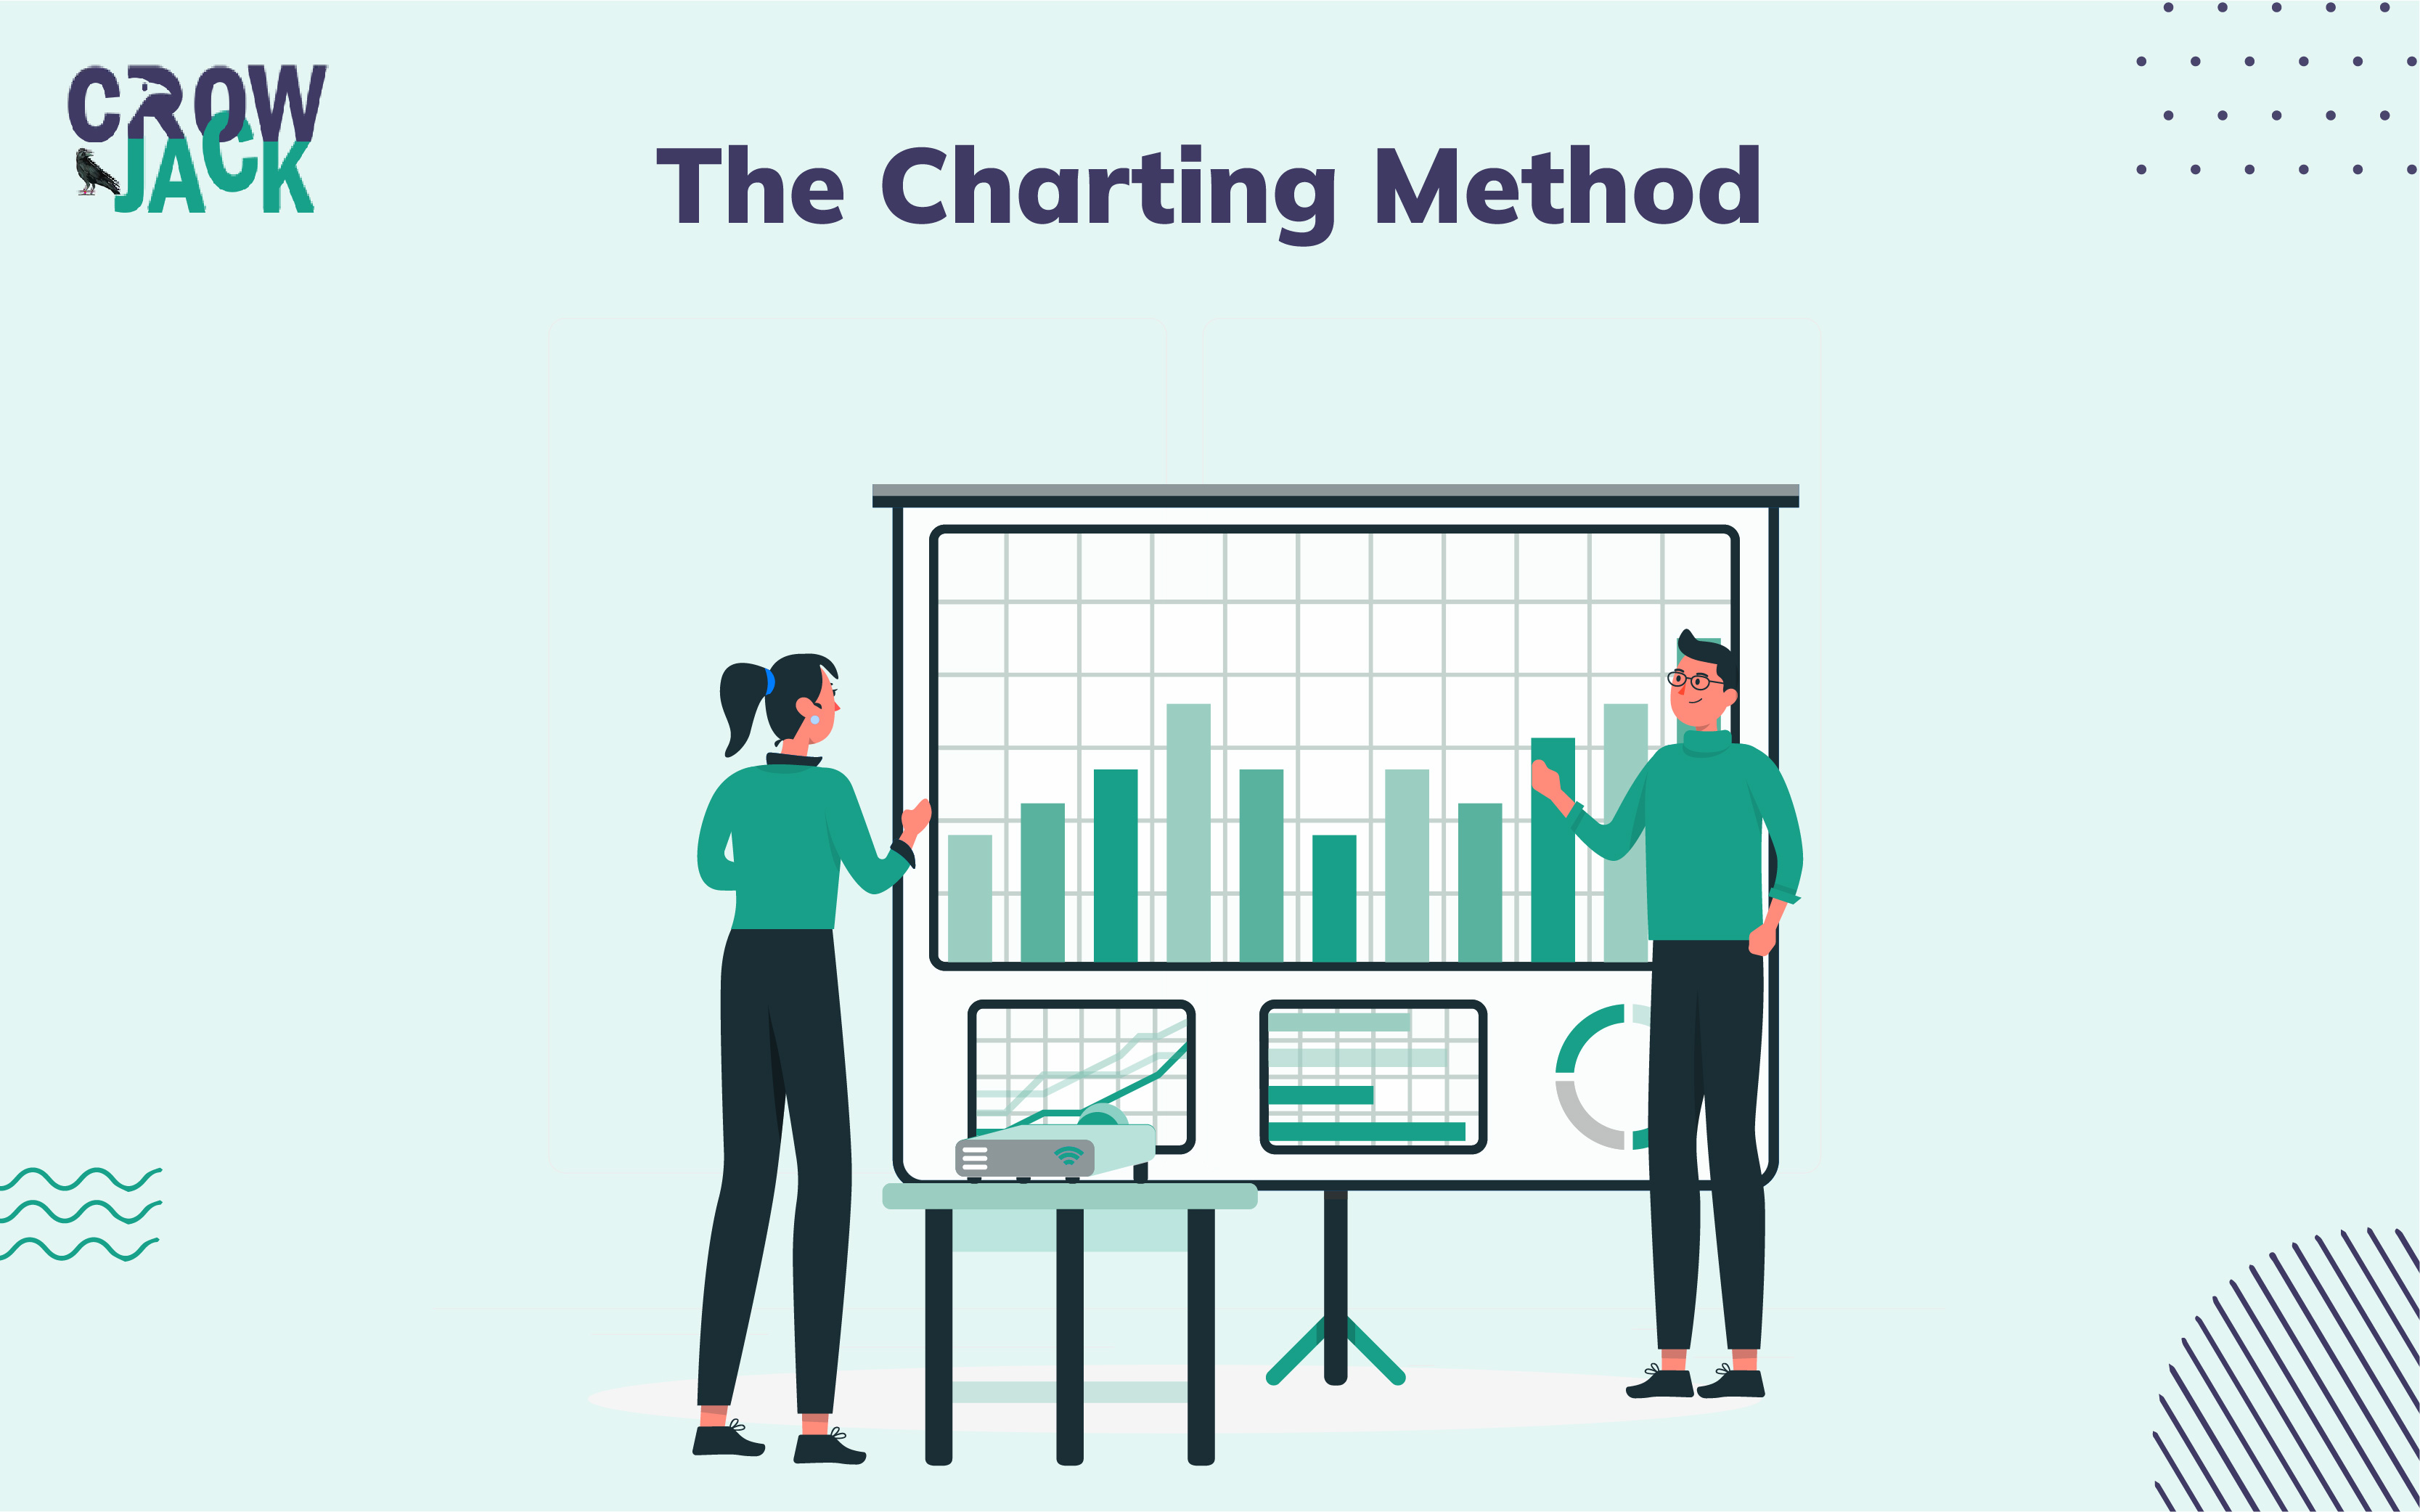 The Charting Method